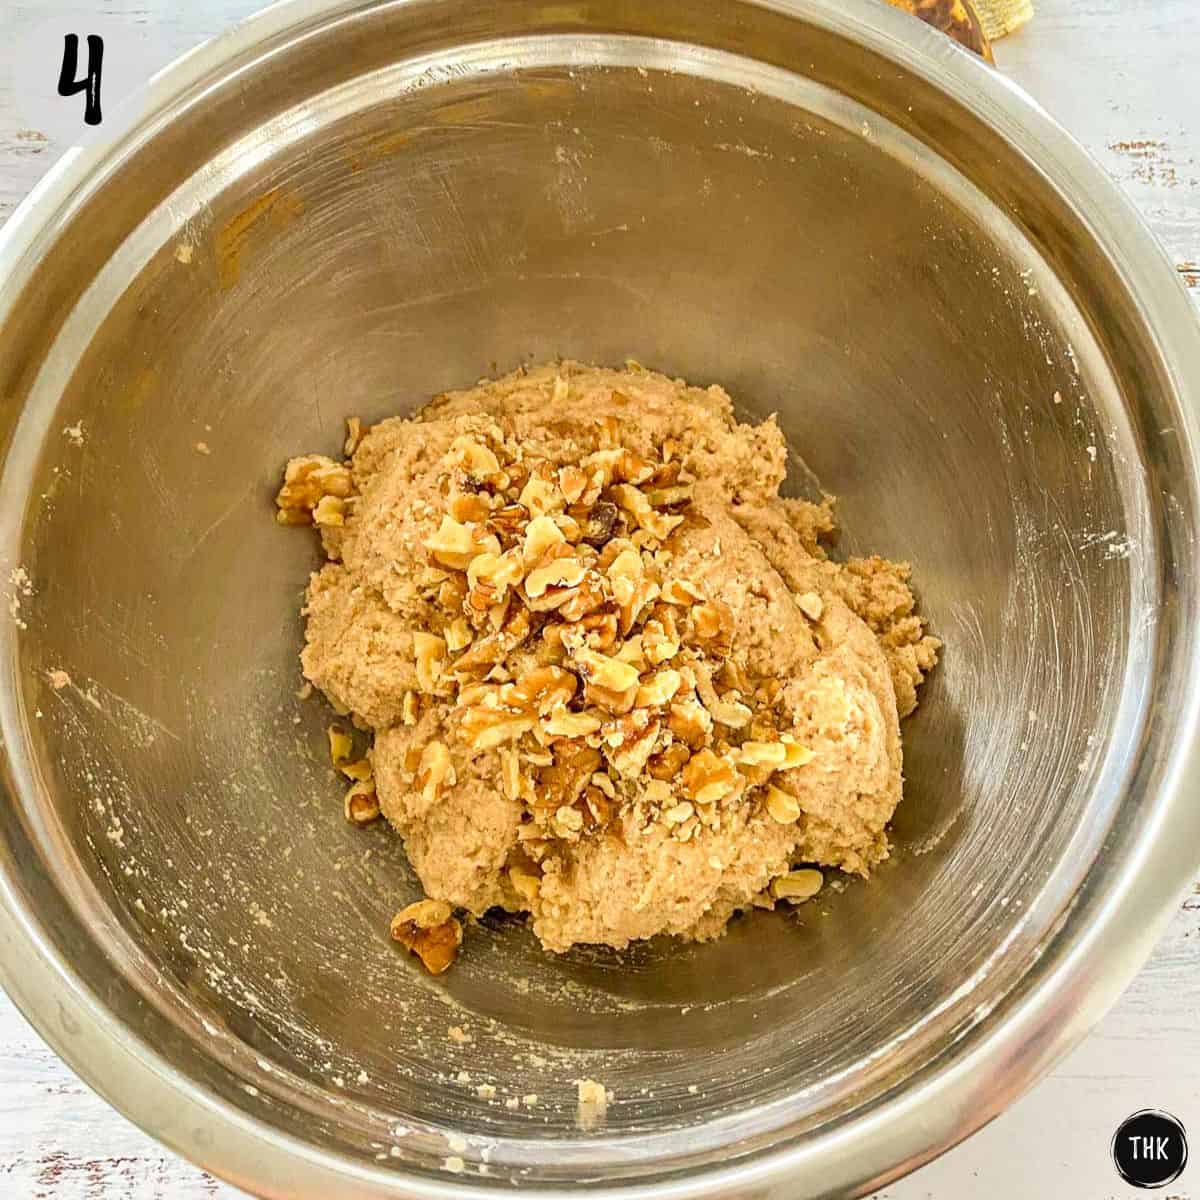 Chopped walnuts on top of muffin batter inside large bowl.